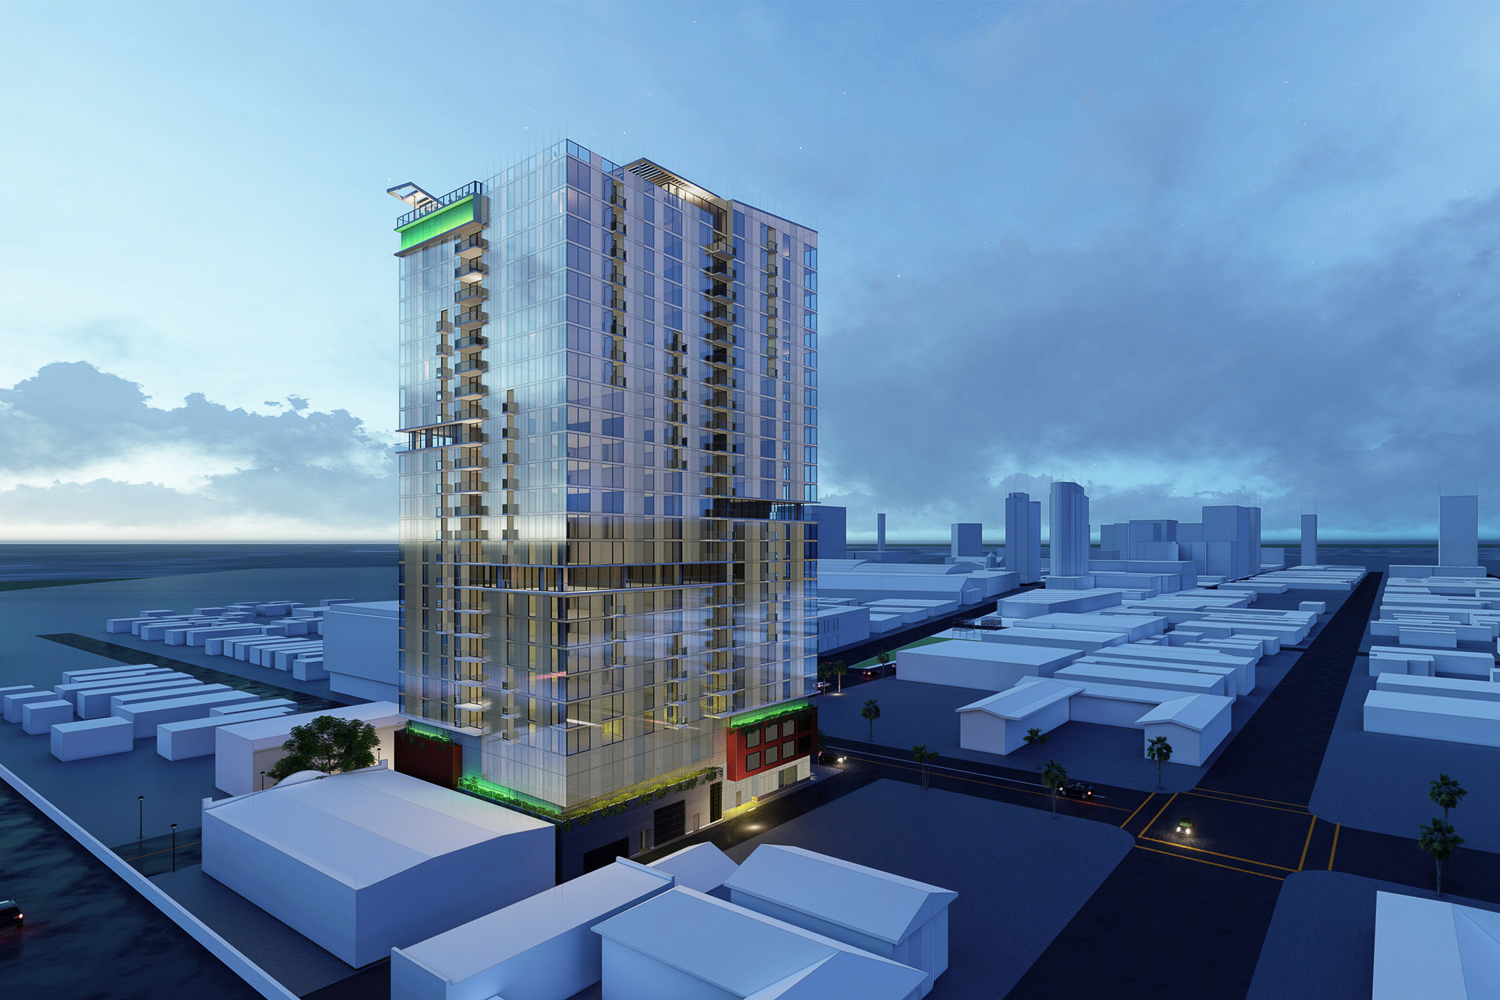 600 South 1st Street Garden Gate tower viewed from above the adjacent freeway, rendering by C2K Architecture